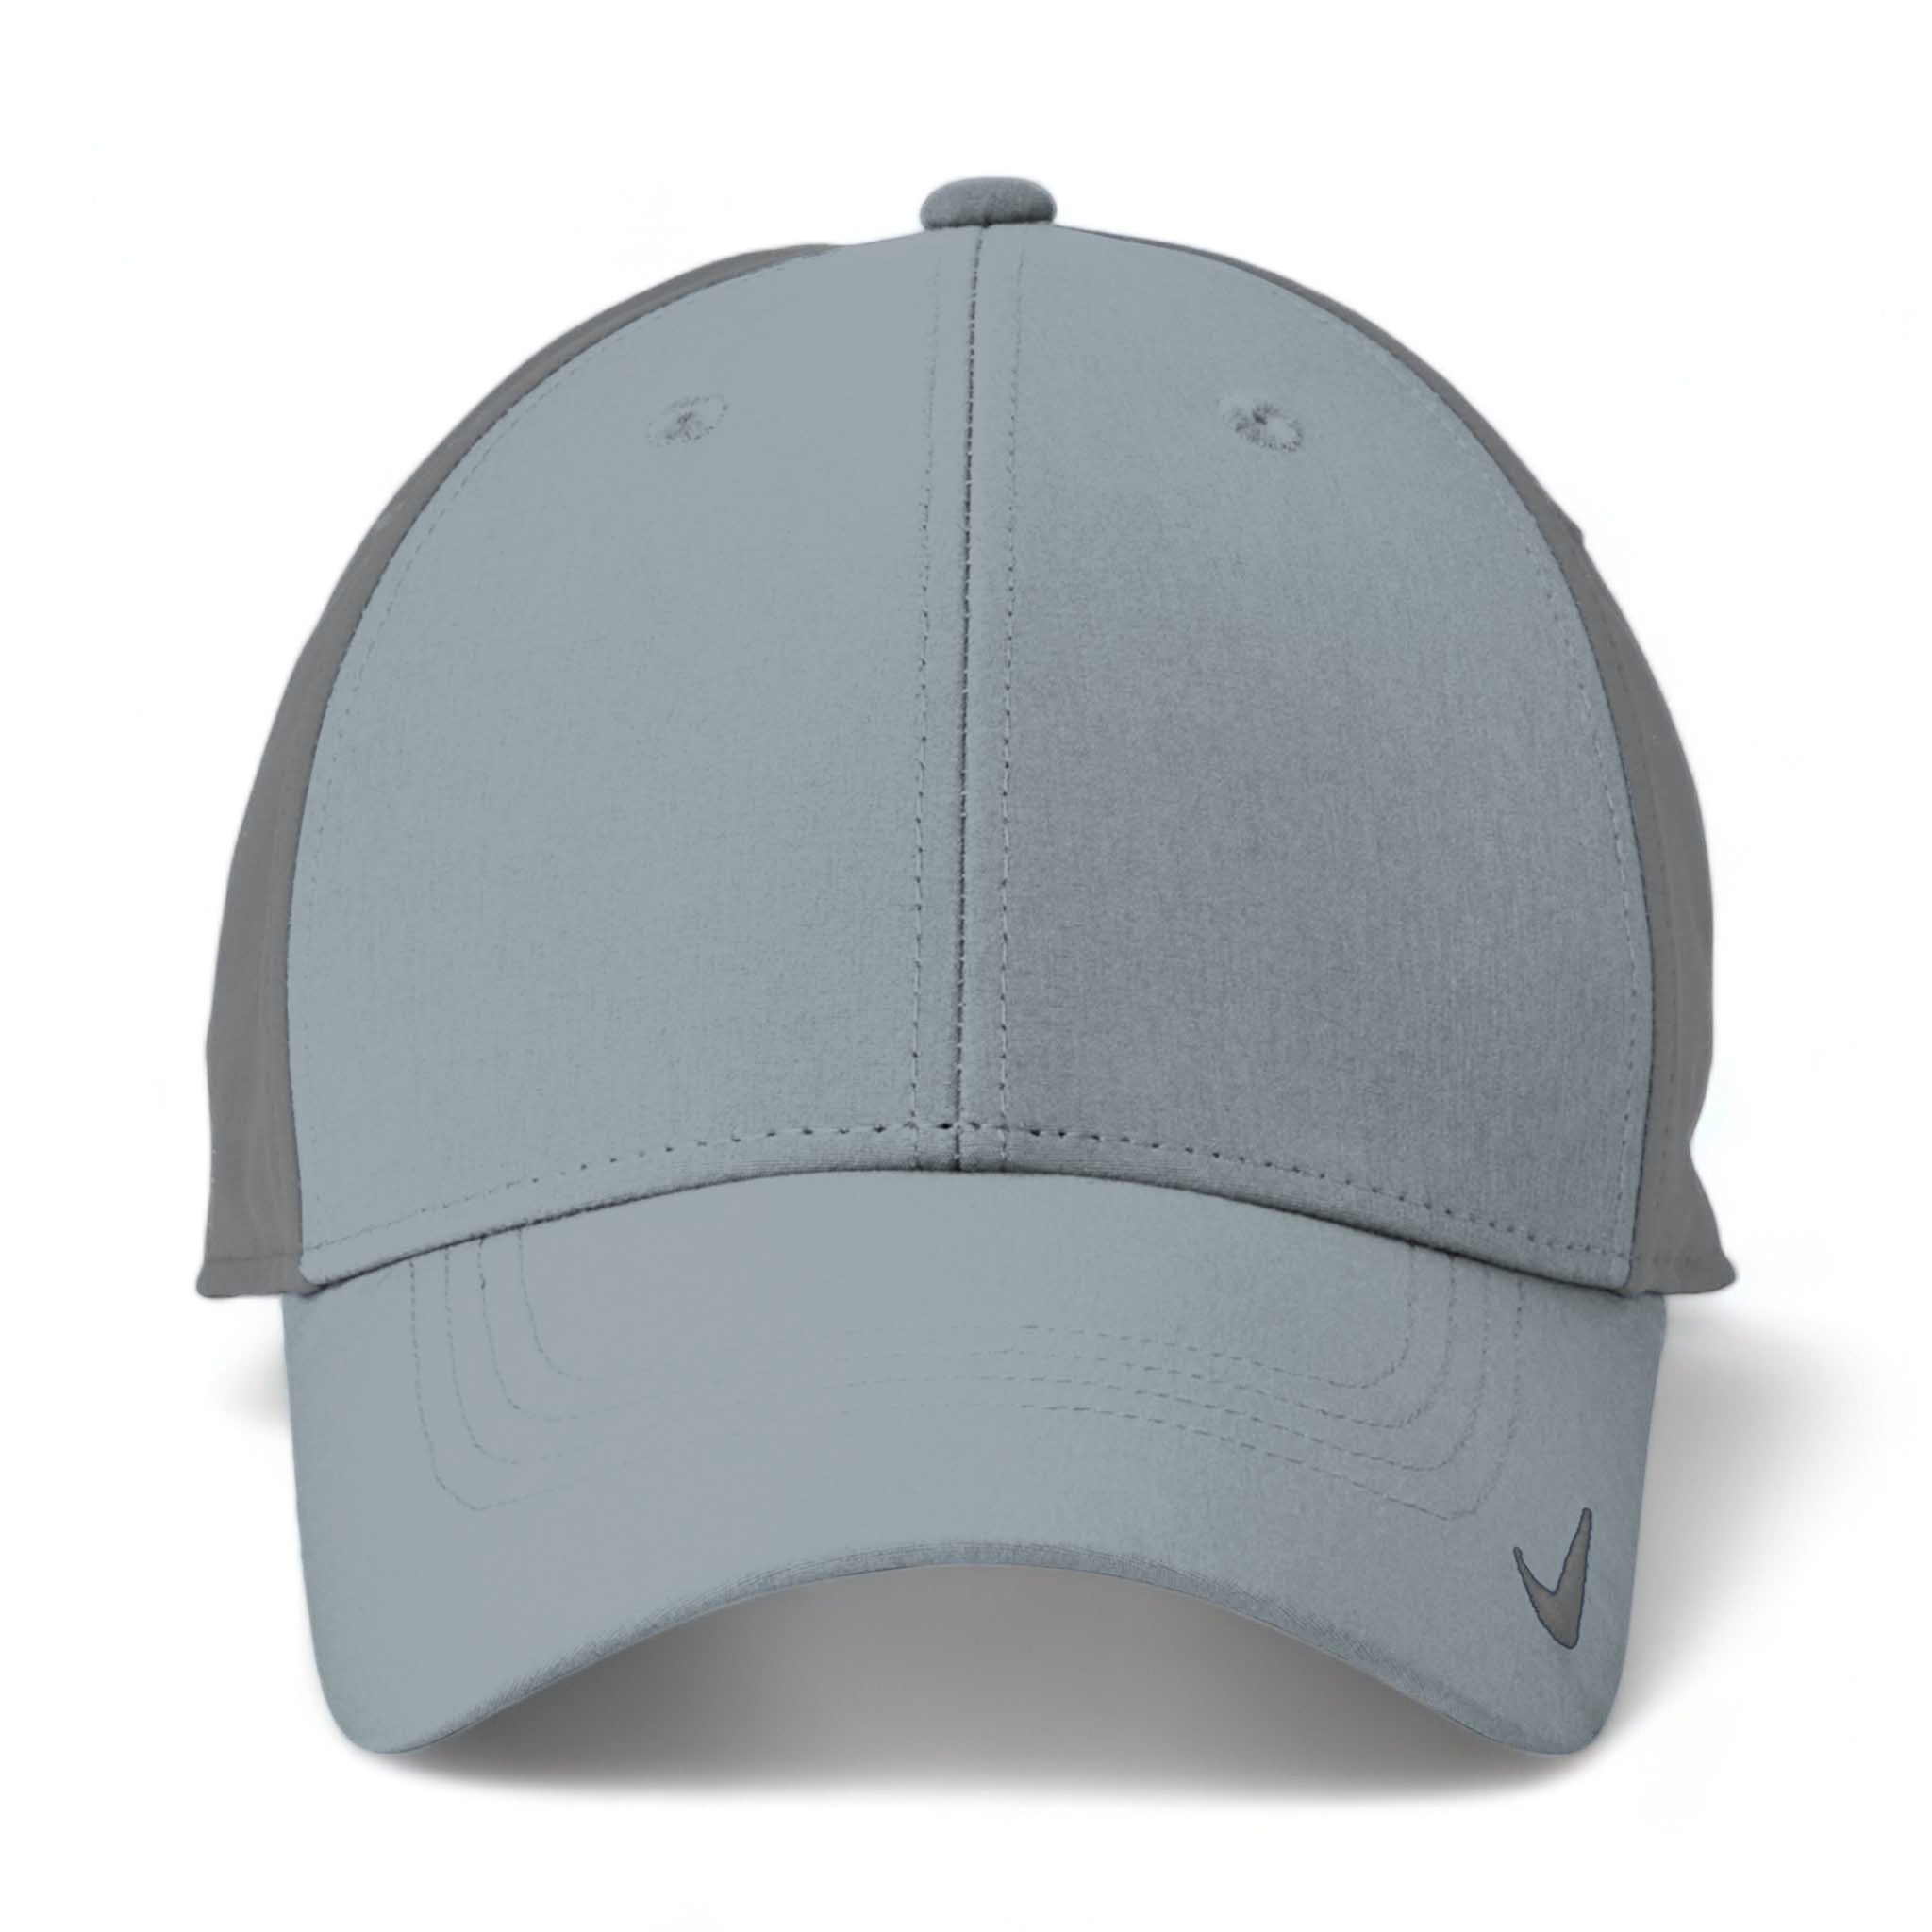 Front view of Nike NKFB6447 custom hat in cool grey and dark grey